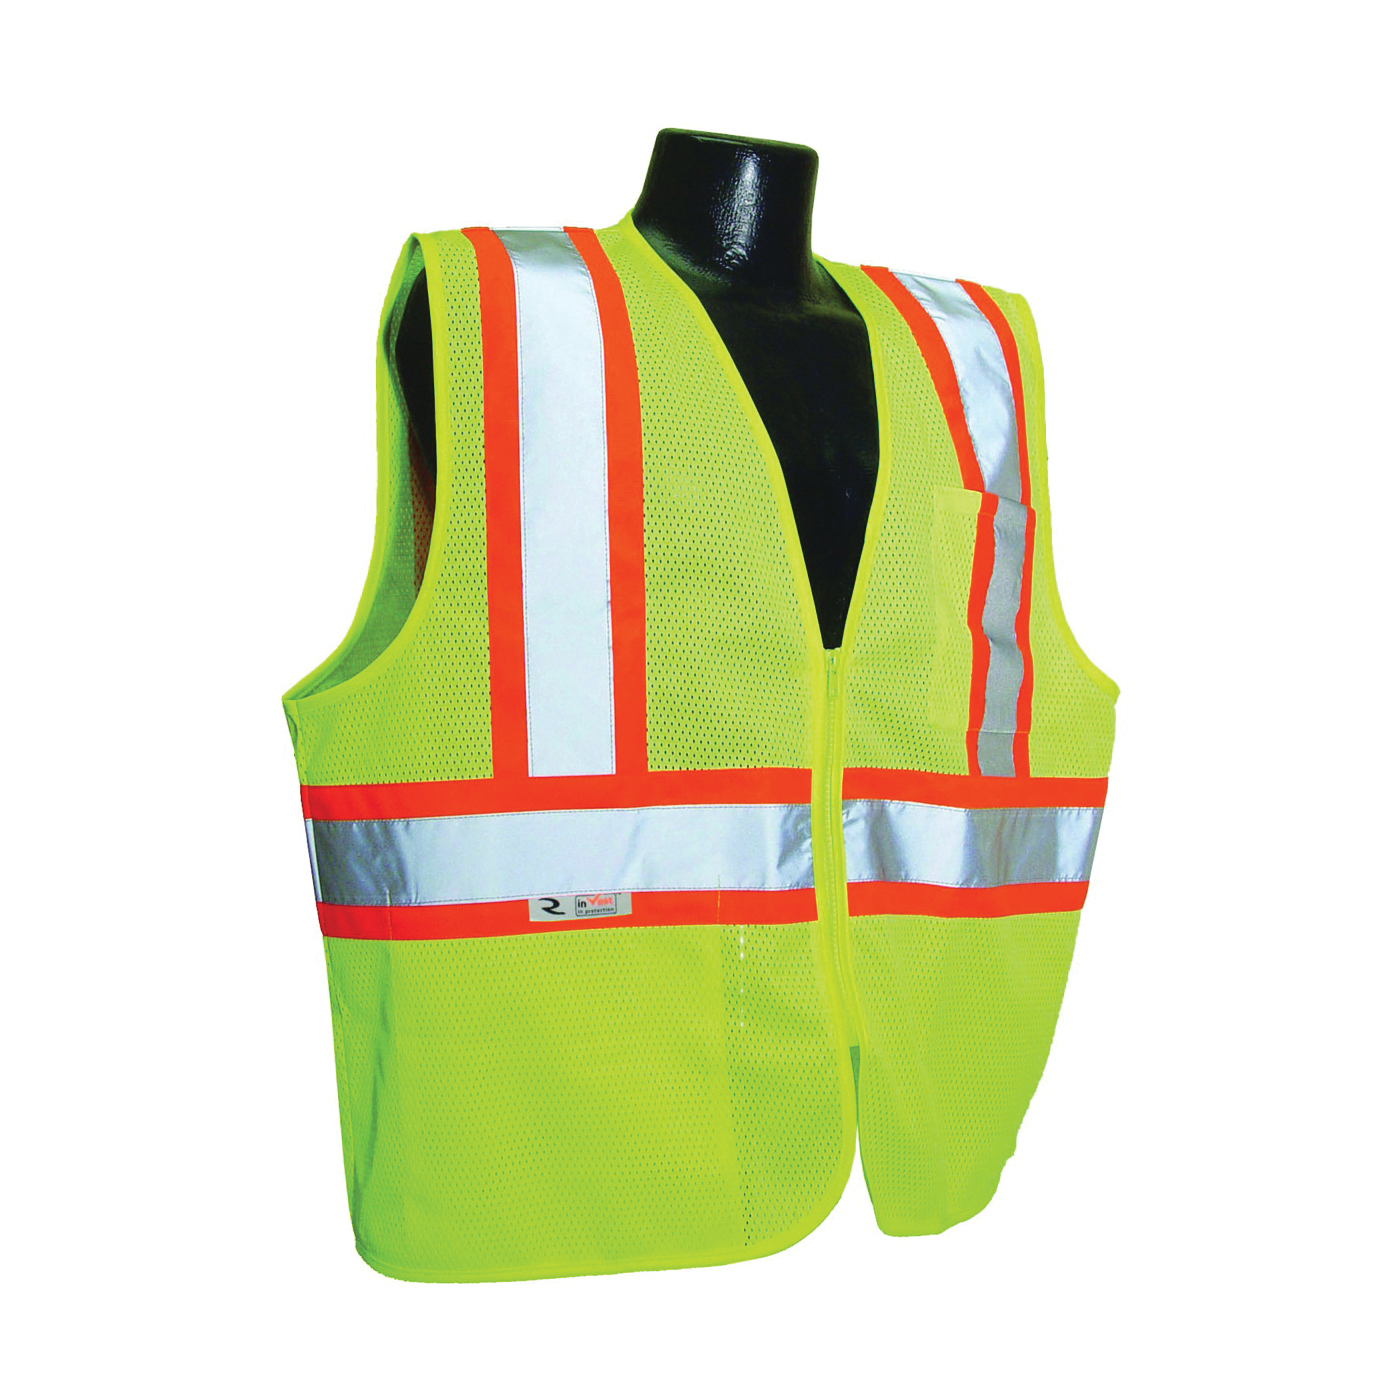 SV22-2ZGM-M Economical Safety Vest, M, Unisex, Fits to Chest Size: 26 in, Polyester, Green, Zipper Closure